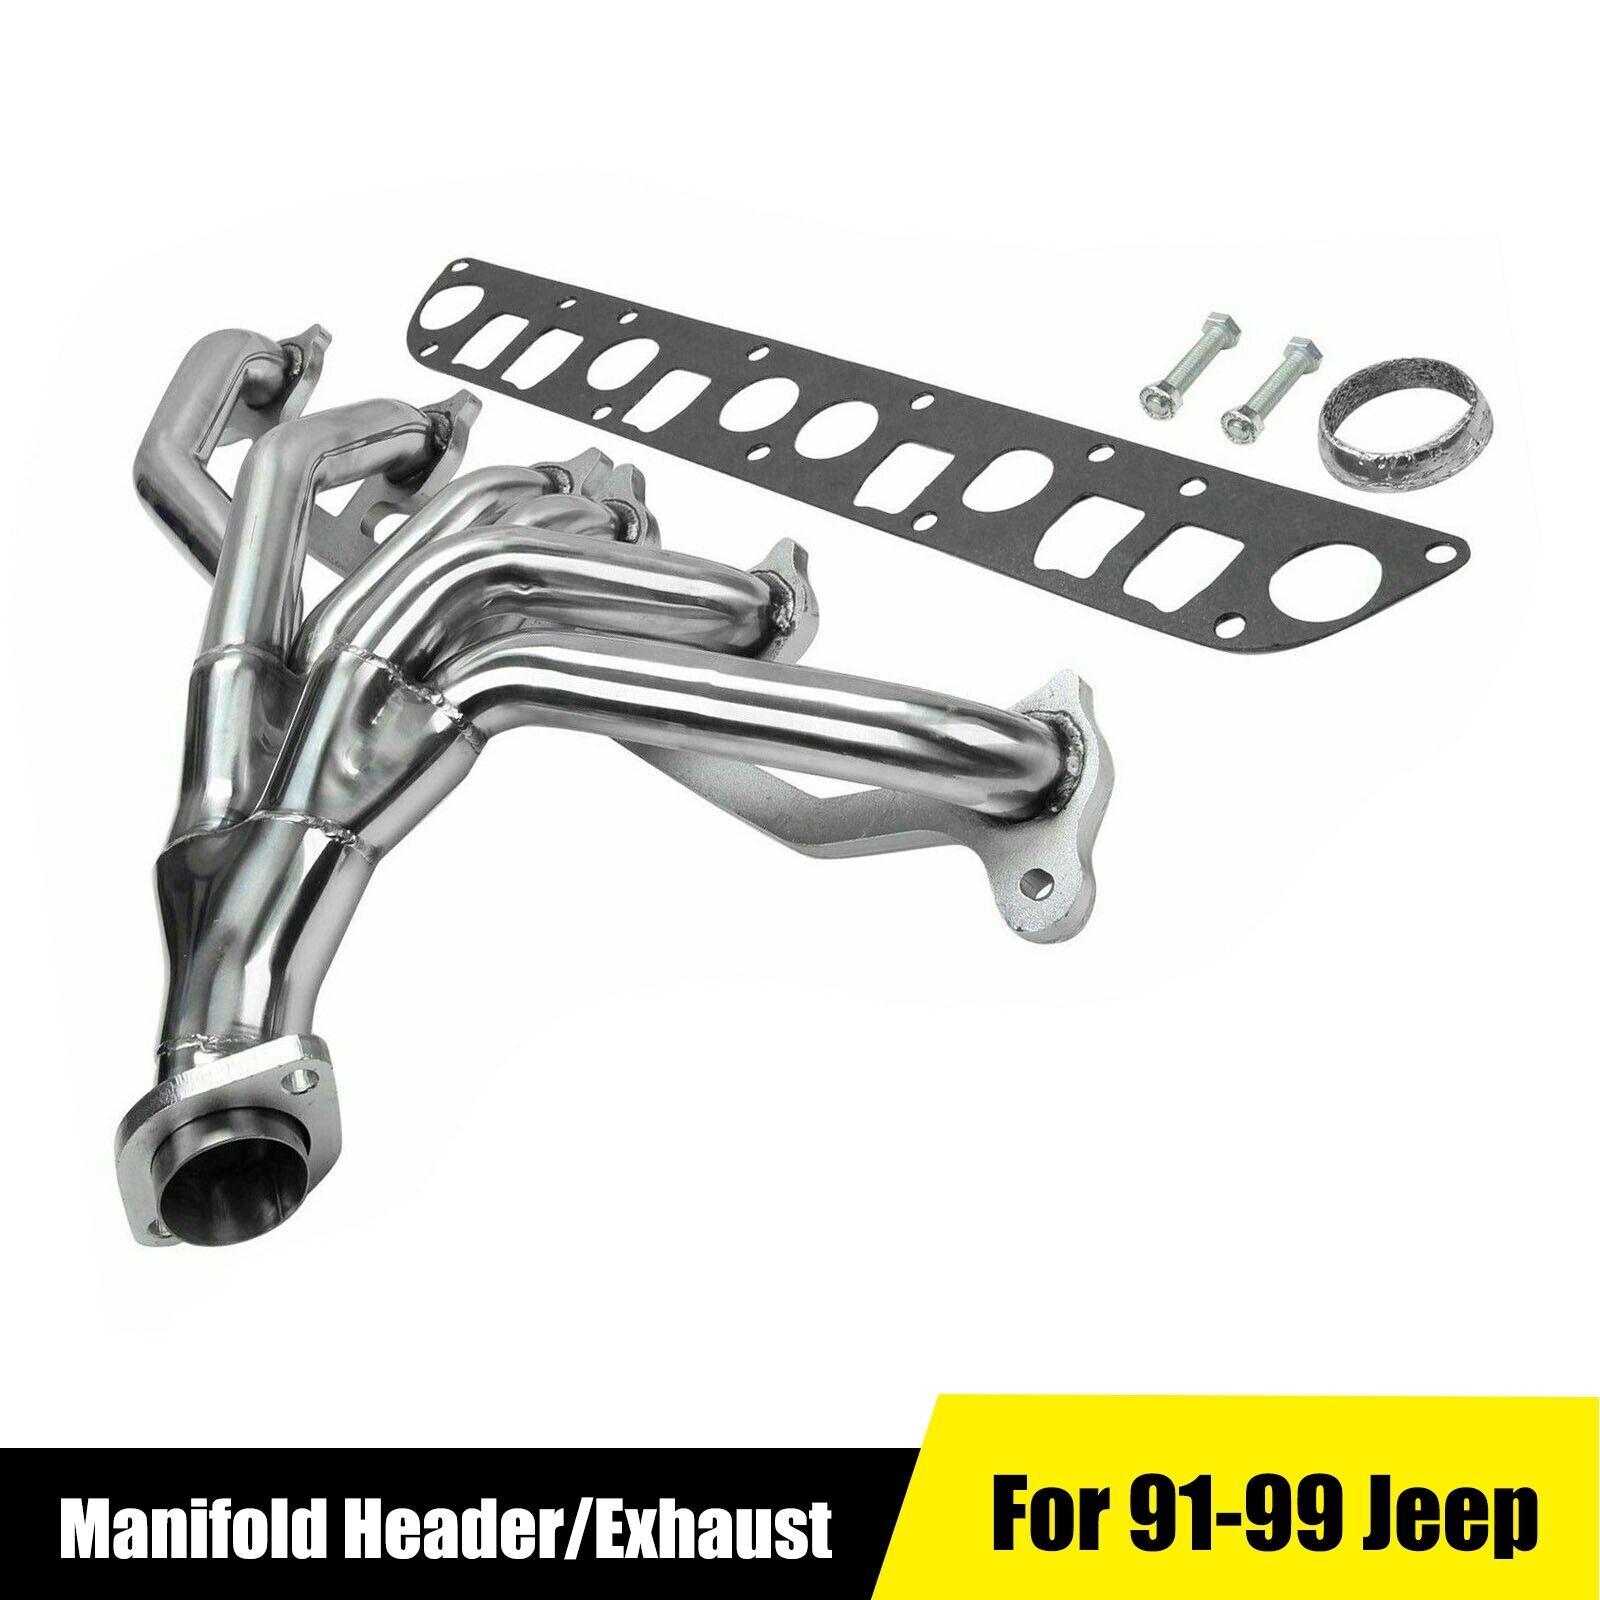 For 91-99 Jeep Wrangler Cherokee 4.0L TJ YJ XJ Stainless Manifold Header/Exhaust